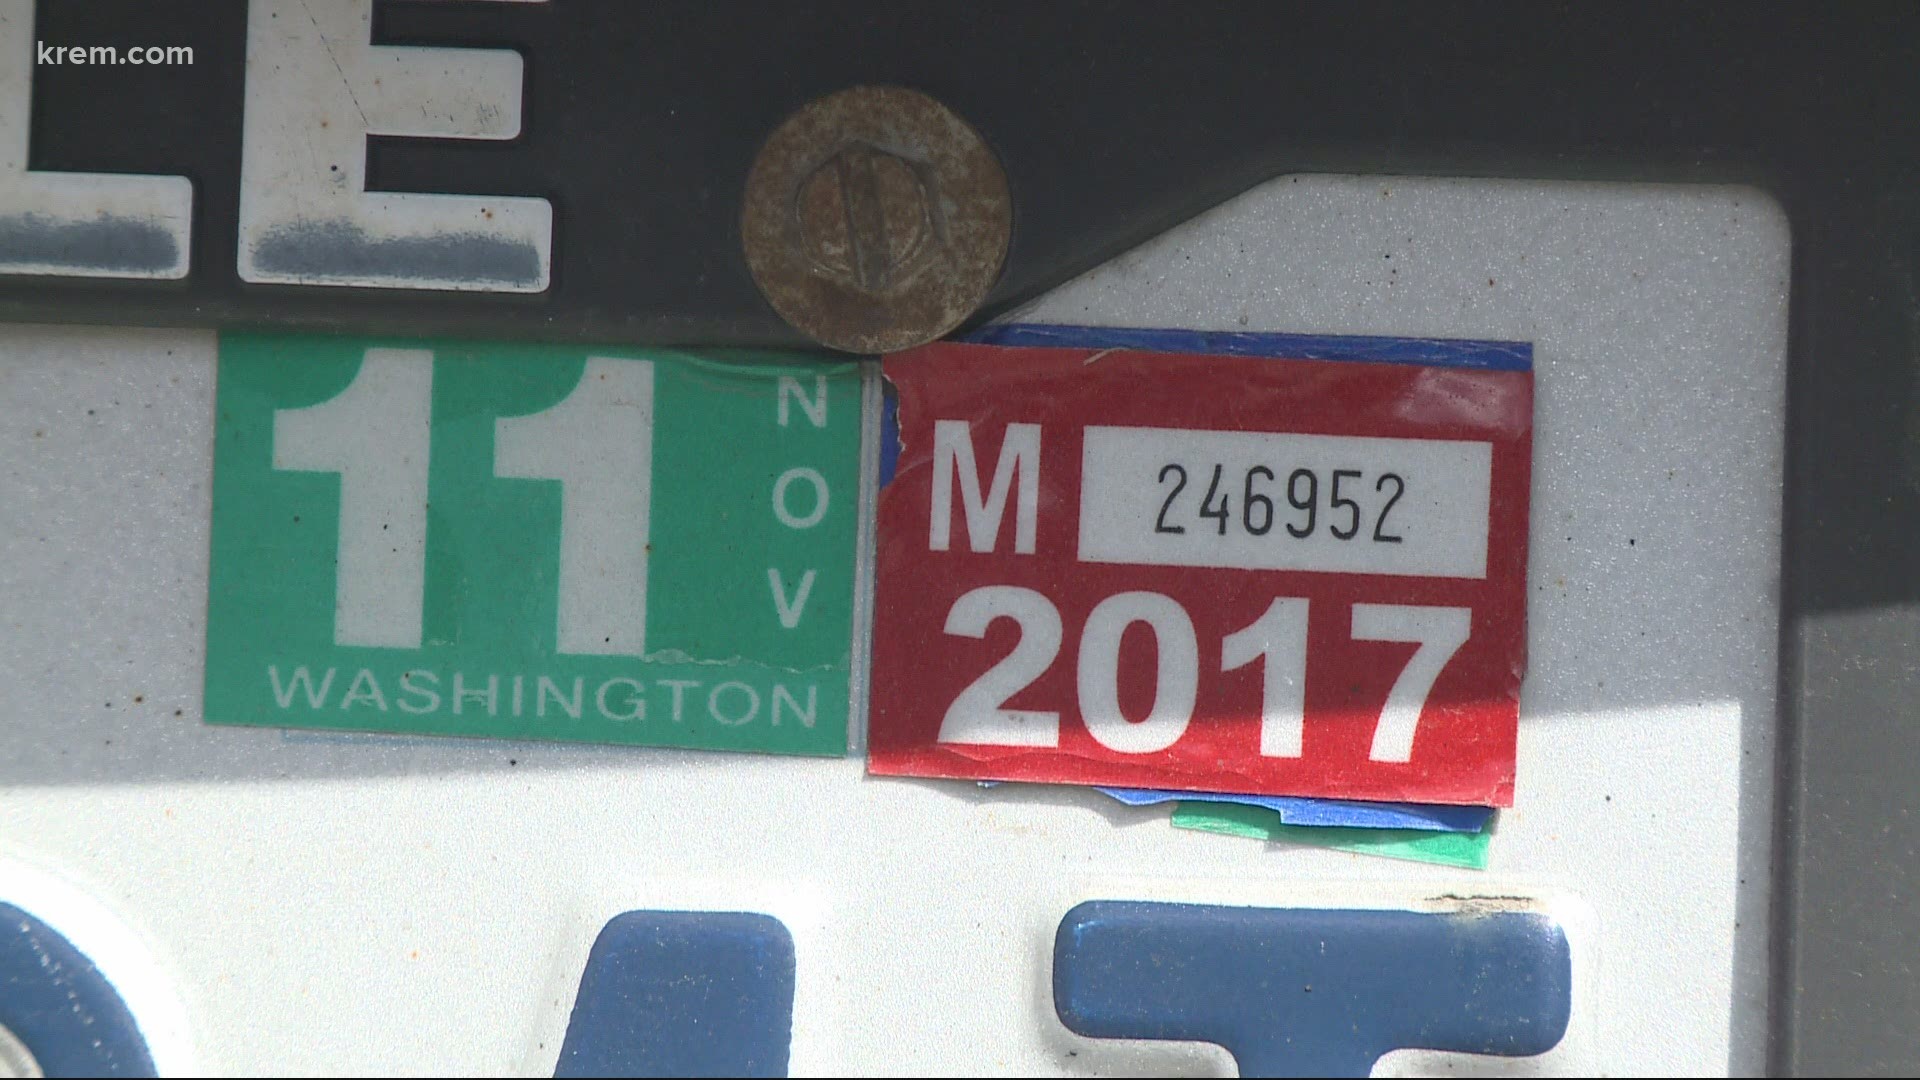 The court ruled on Thursday that Initiative I-976, which would cap car tabs at $30, is unconstitutional. I-976 was approved by voters in November 2019.